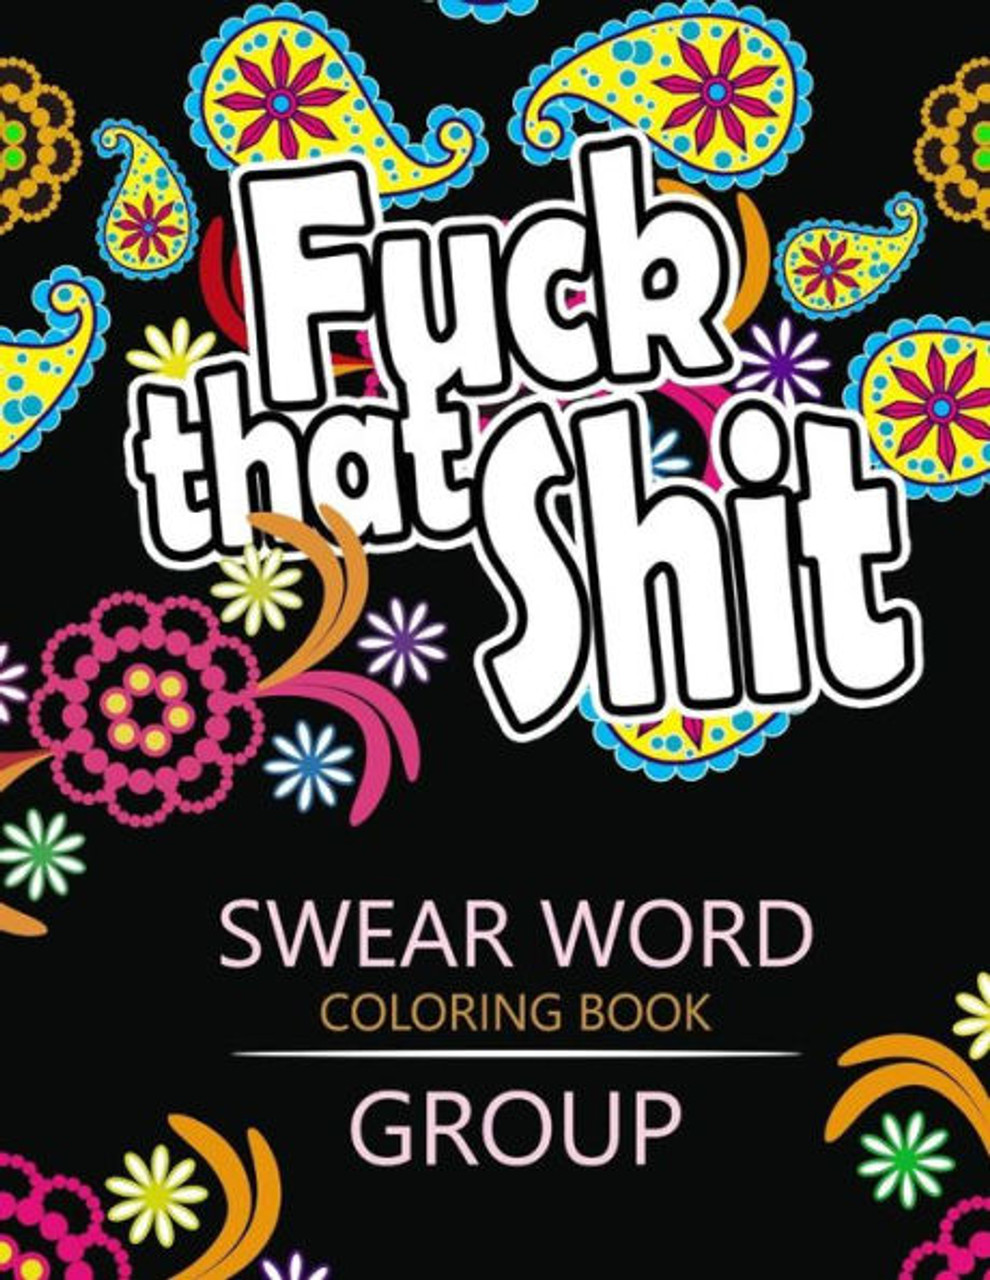 Swear Word Coloring Book Group: Insult Coloring Book ,Adult Coloring Books  (Rude And Insult Coloring Book) - Rudy Team - 9781535021289